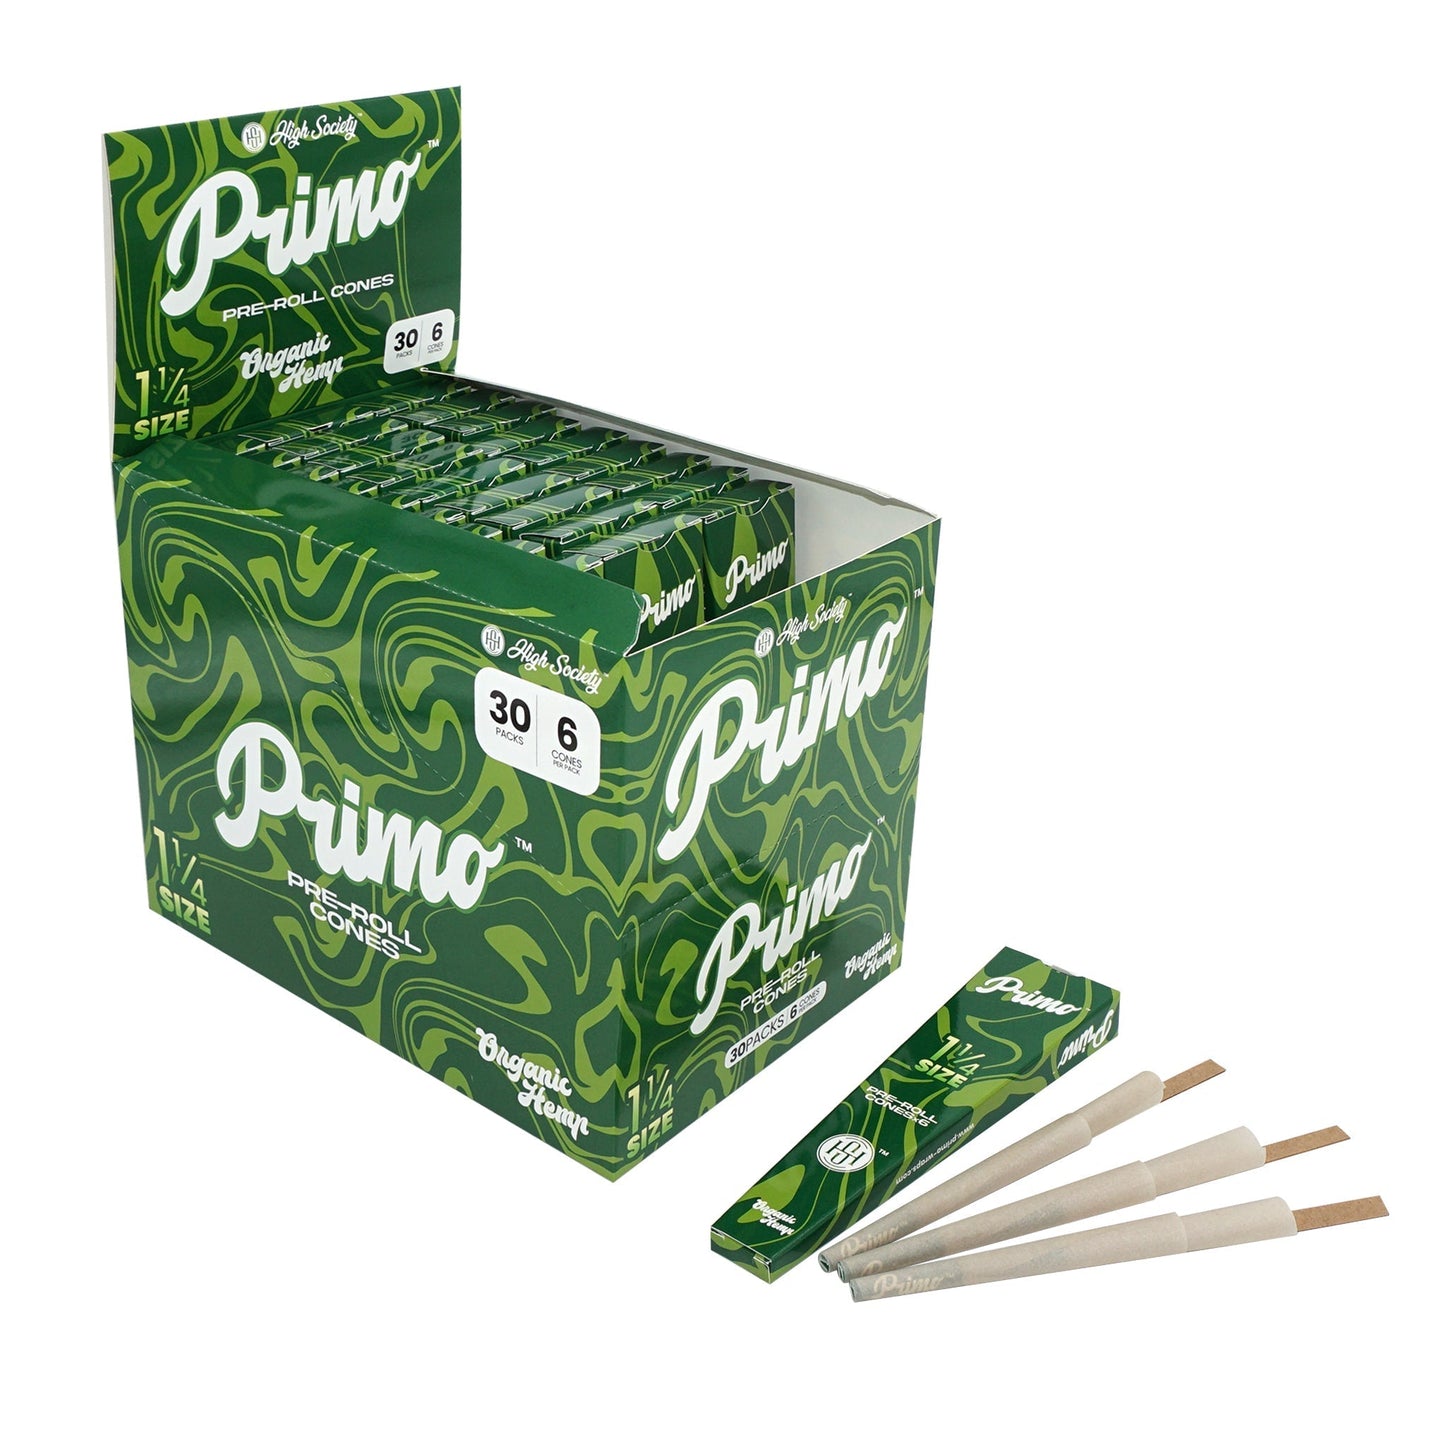 High Society Primo 1.25 Organic Hemp Pre-Roll Cones (Box of 30 Packs) by Primo | Mission Dispensary